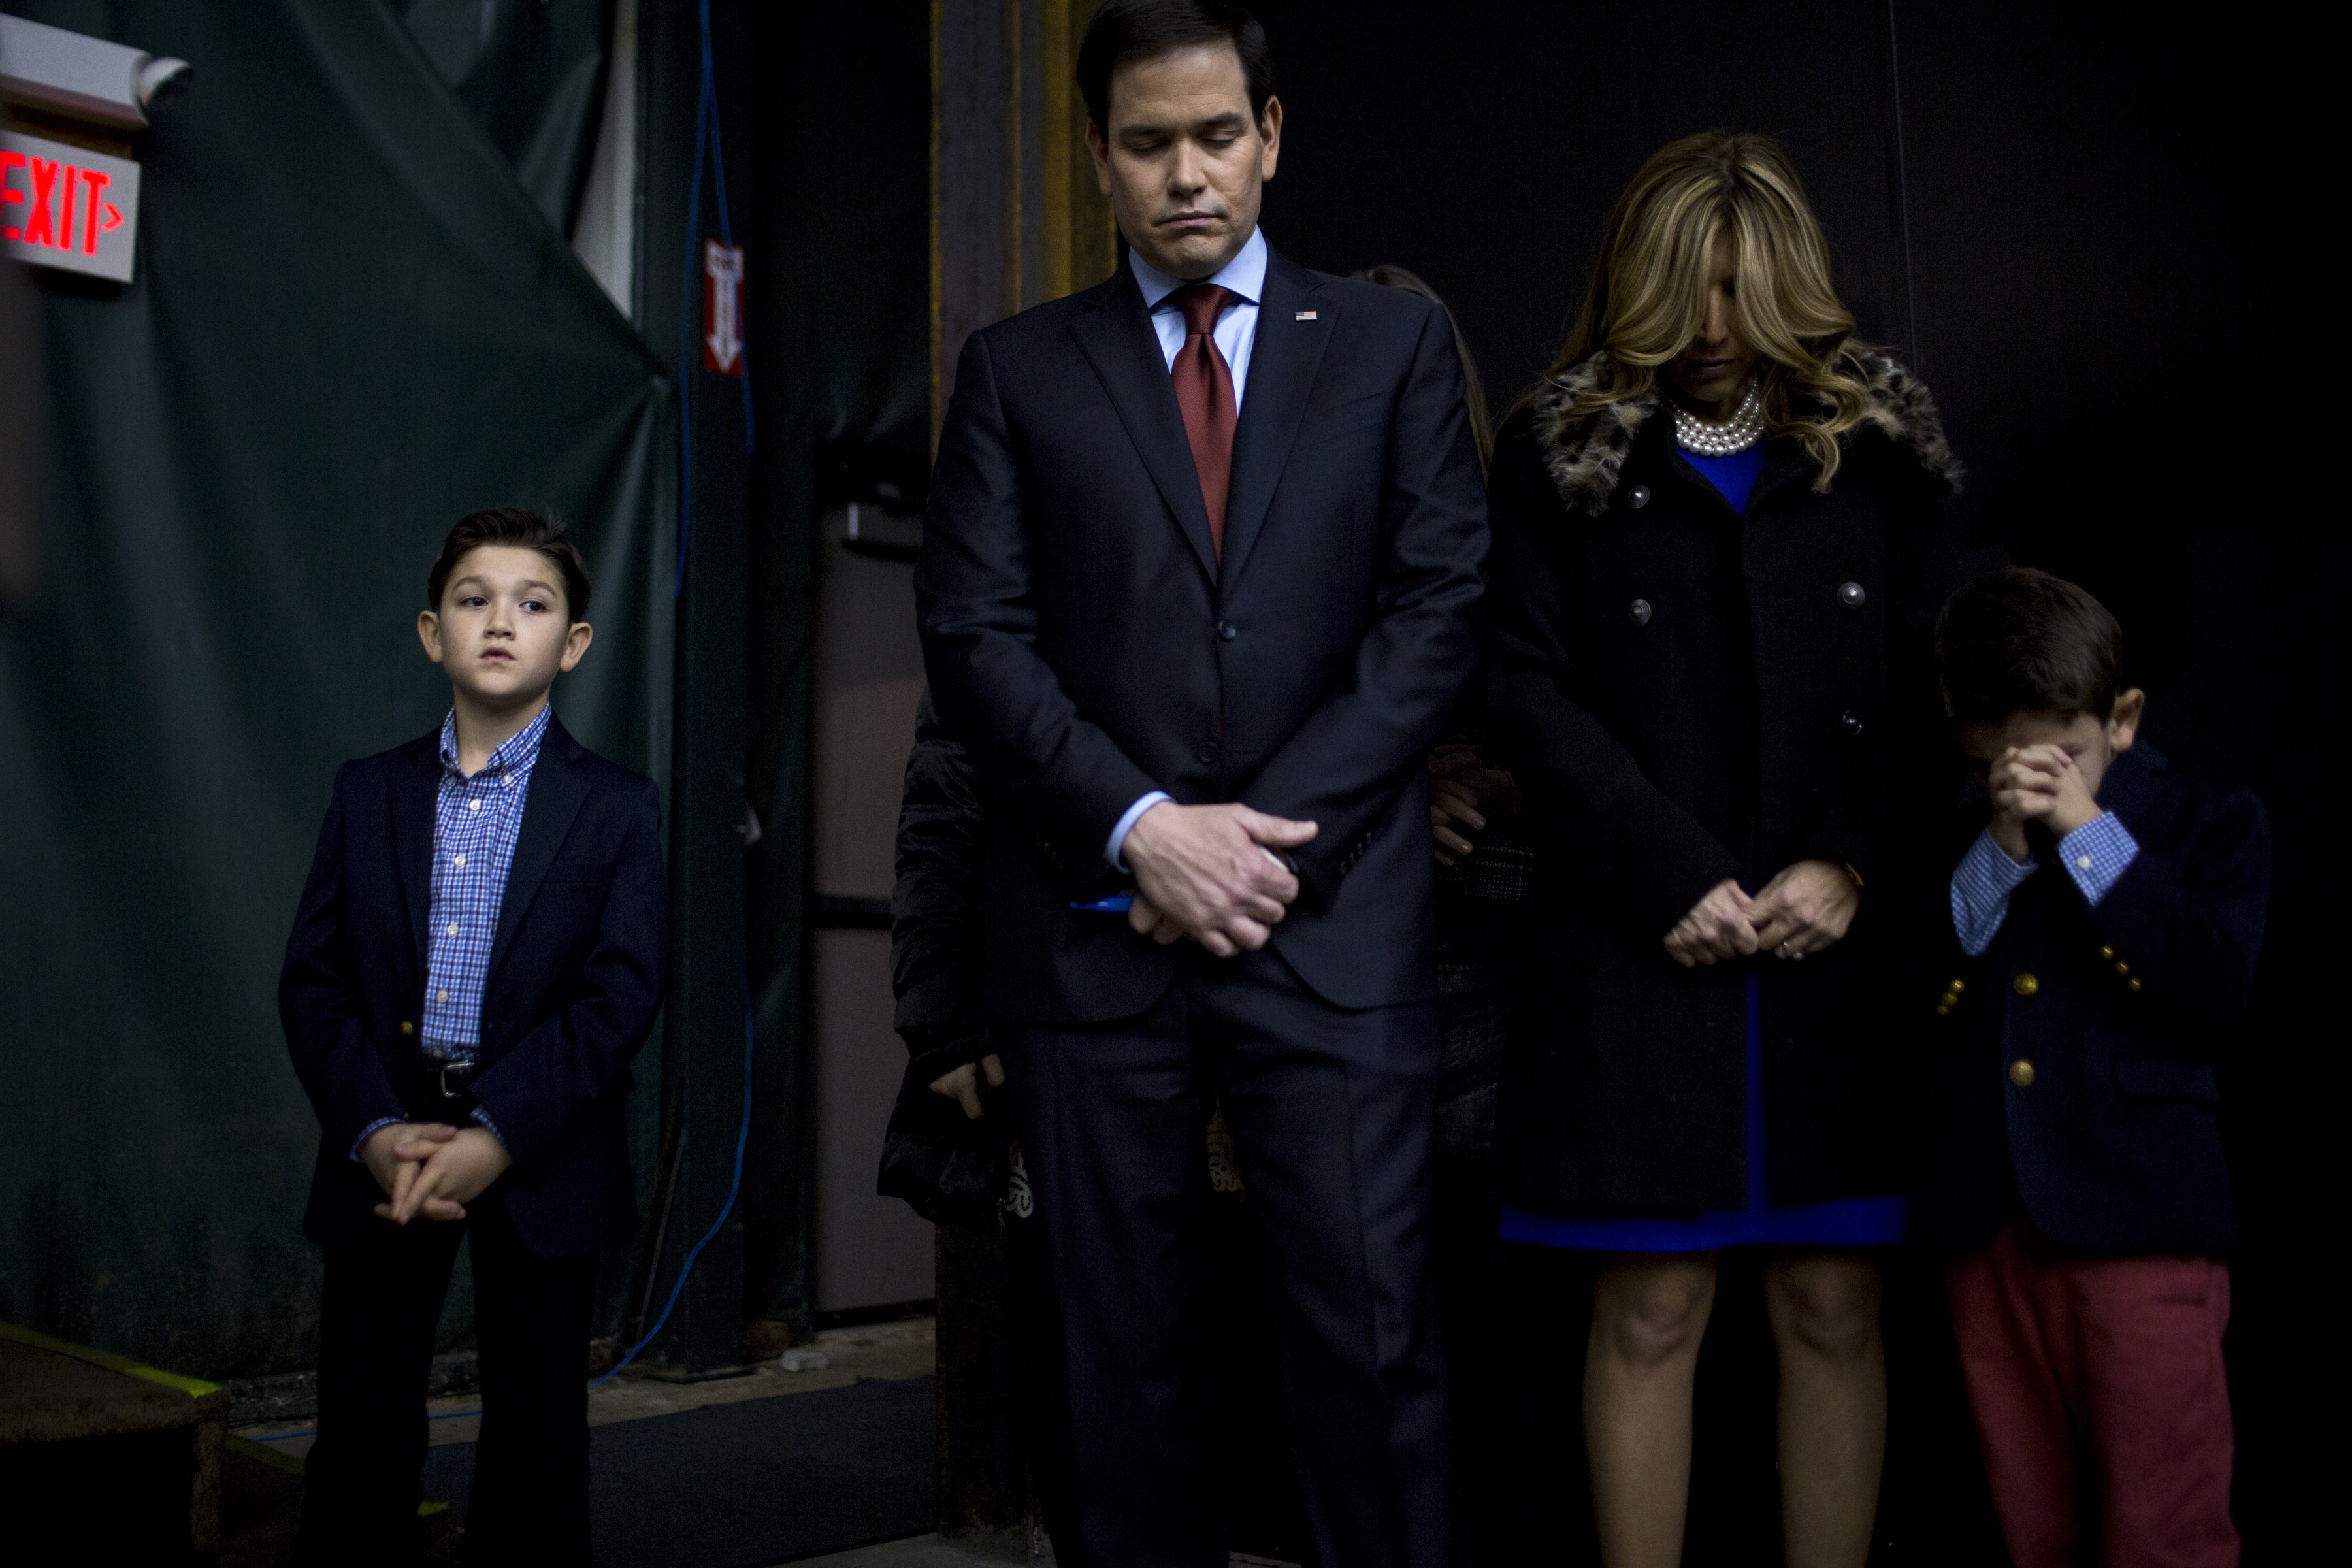 Republican presidential candidate, Marco Rubio, appeared at a GOP caucus location with his family on Feb. 1, 2016, in Clive, Iowa.